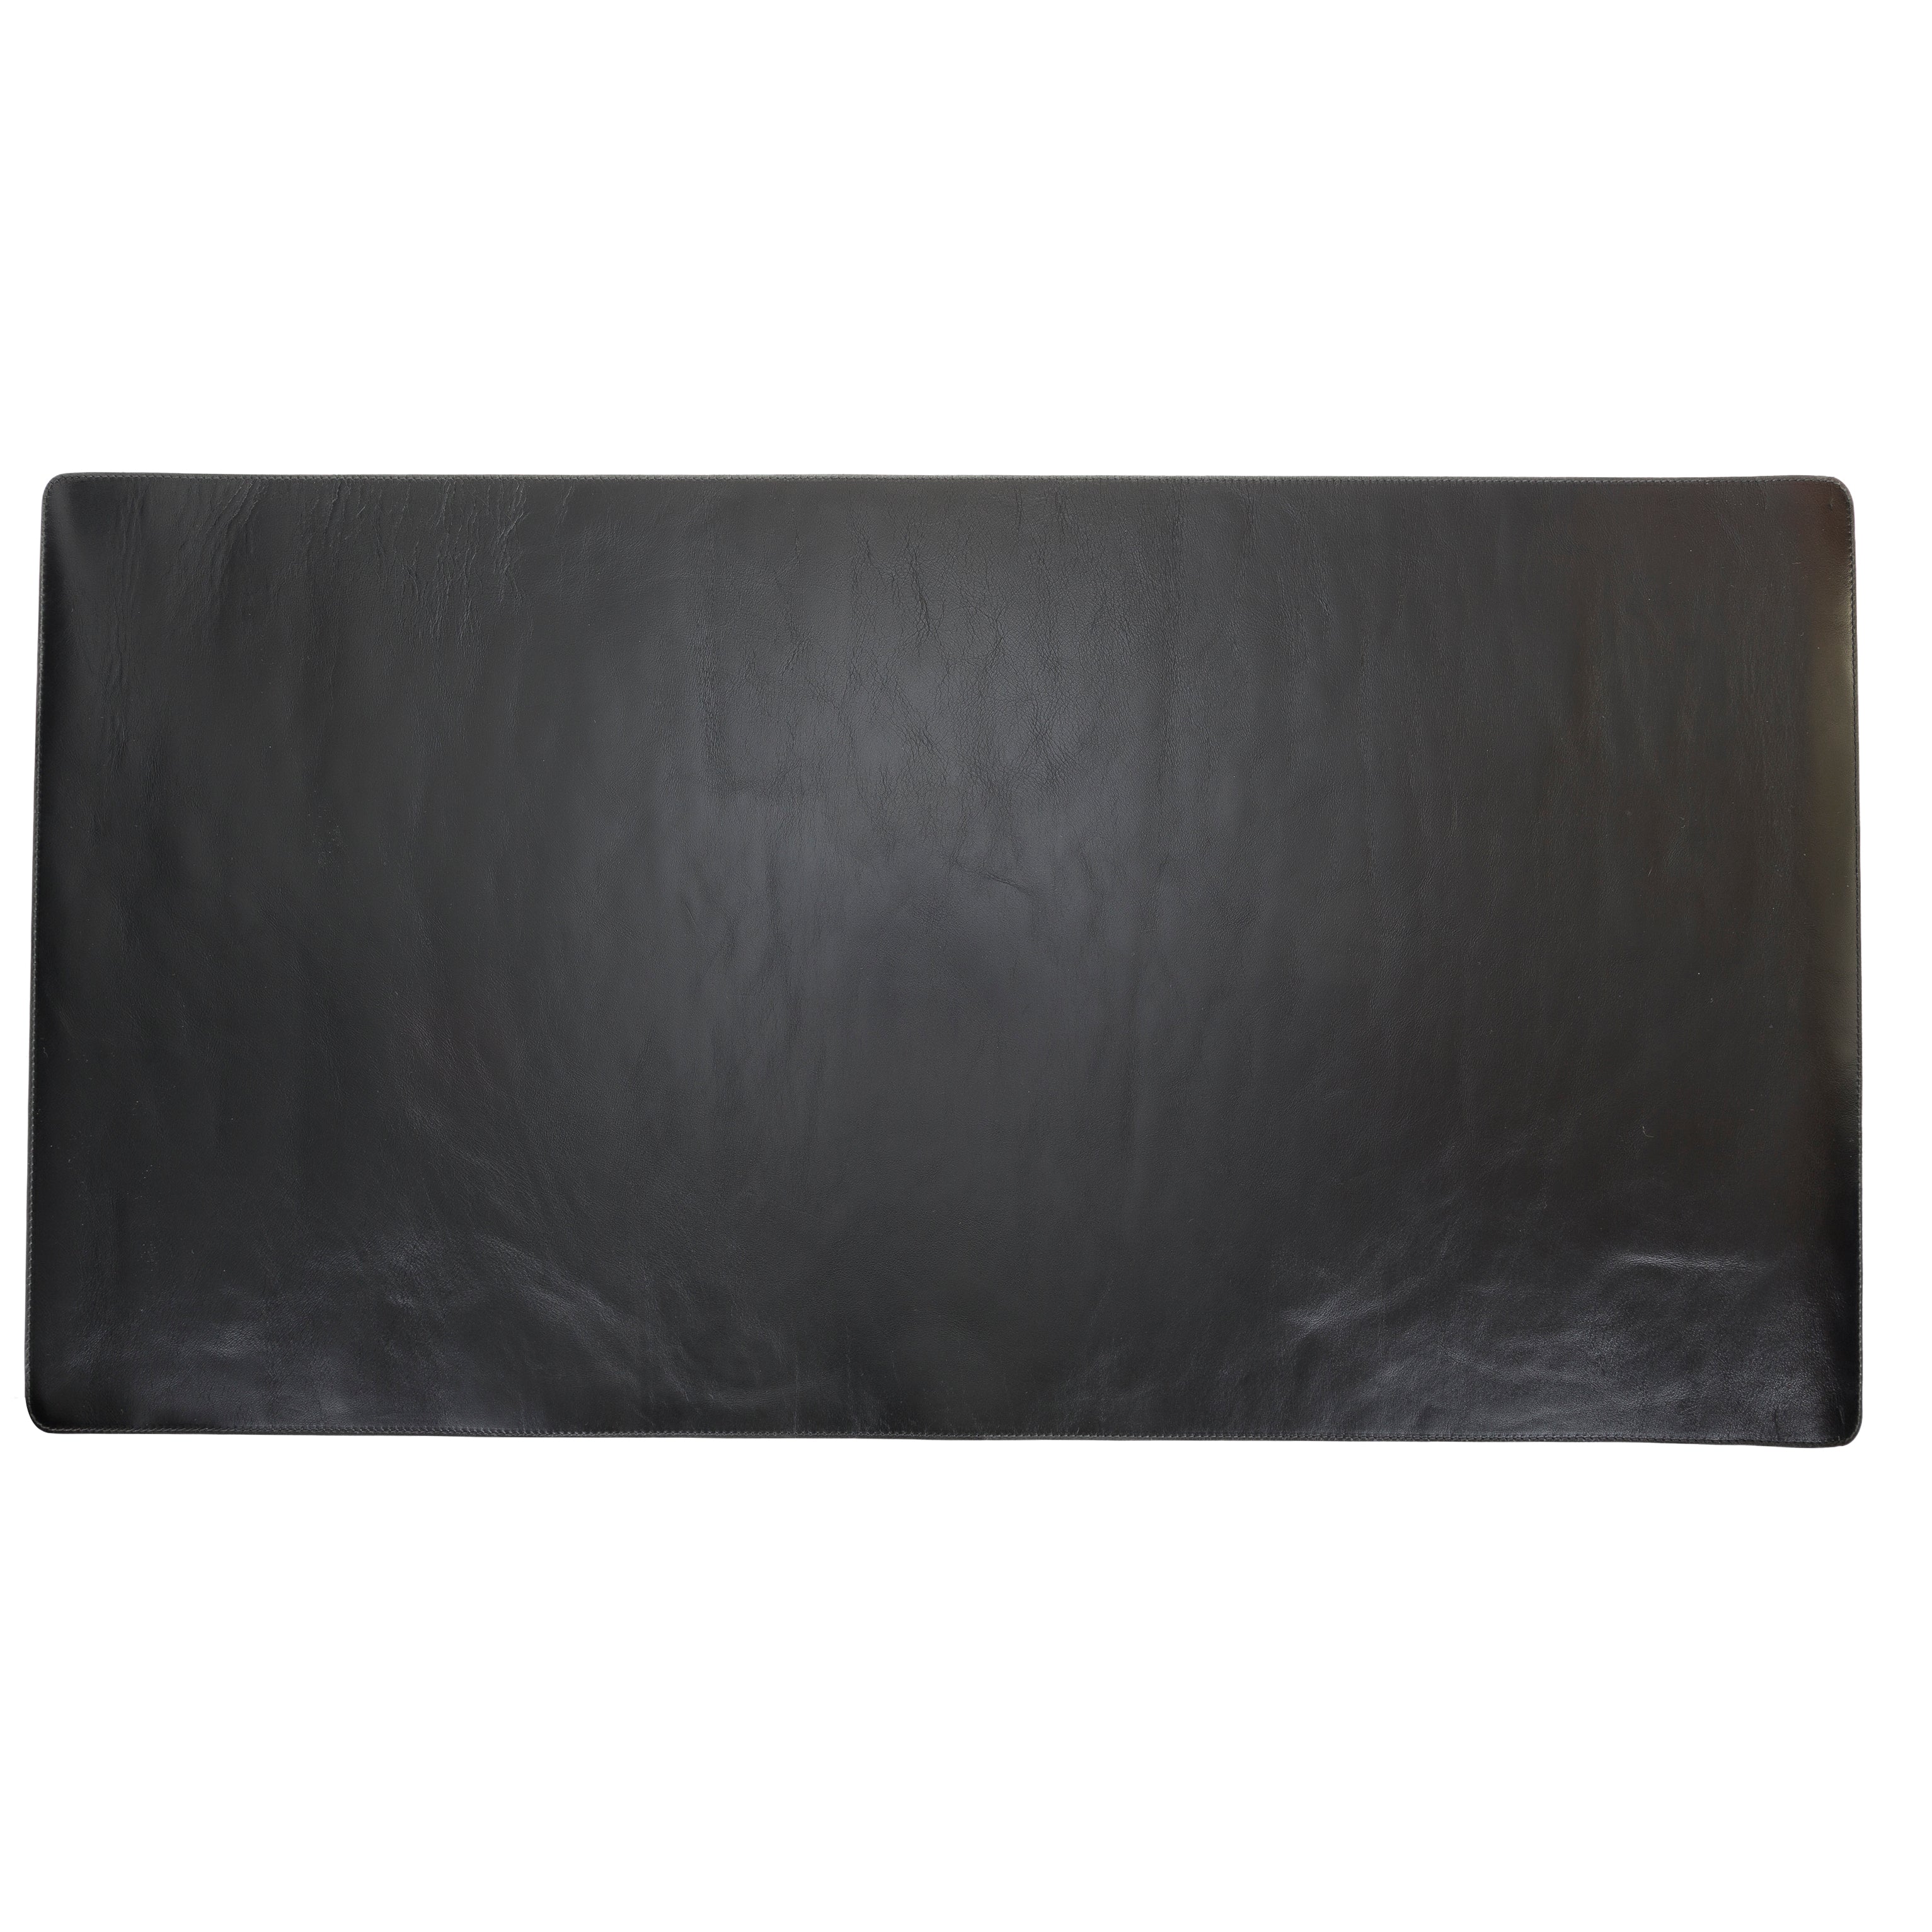 LupinnyLeather Genuine Leather Deskmat, Computer Pad, Office Desk Pad (Black) 8